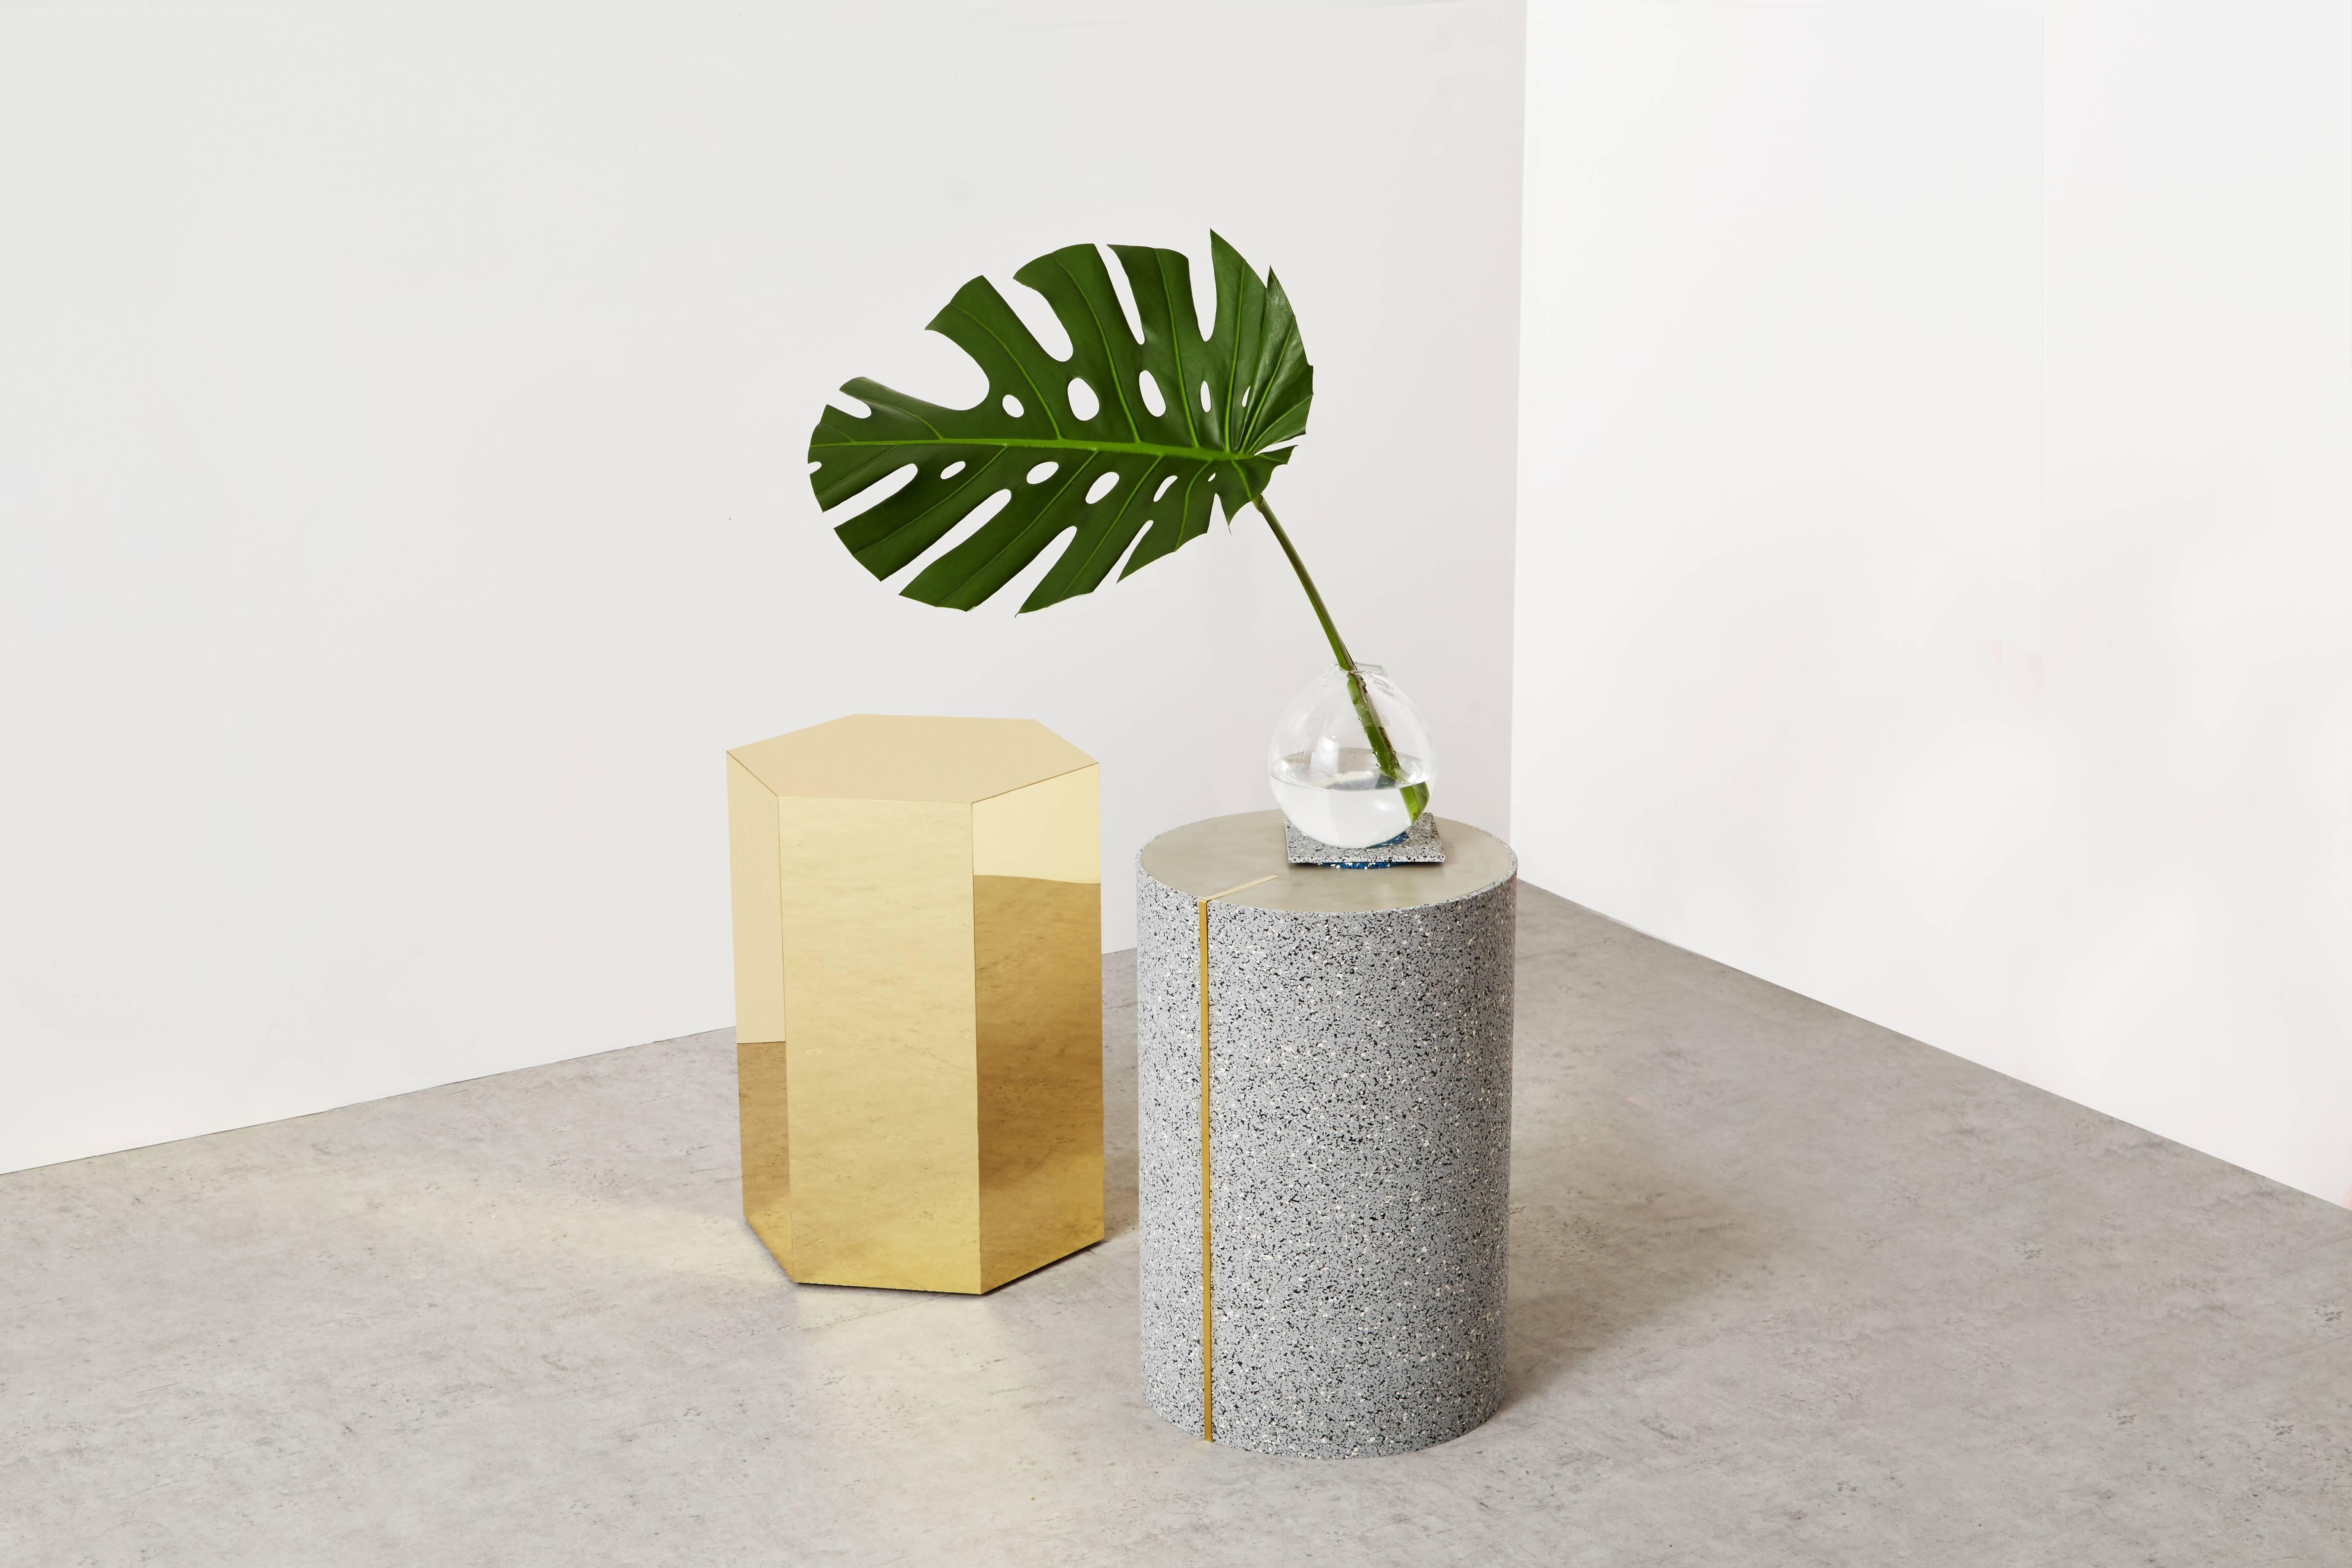 Shiny Hex Side Table created by Slash Objects

Materials: Brass & Marble